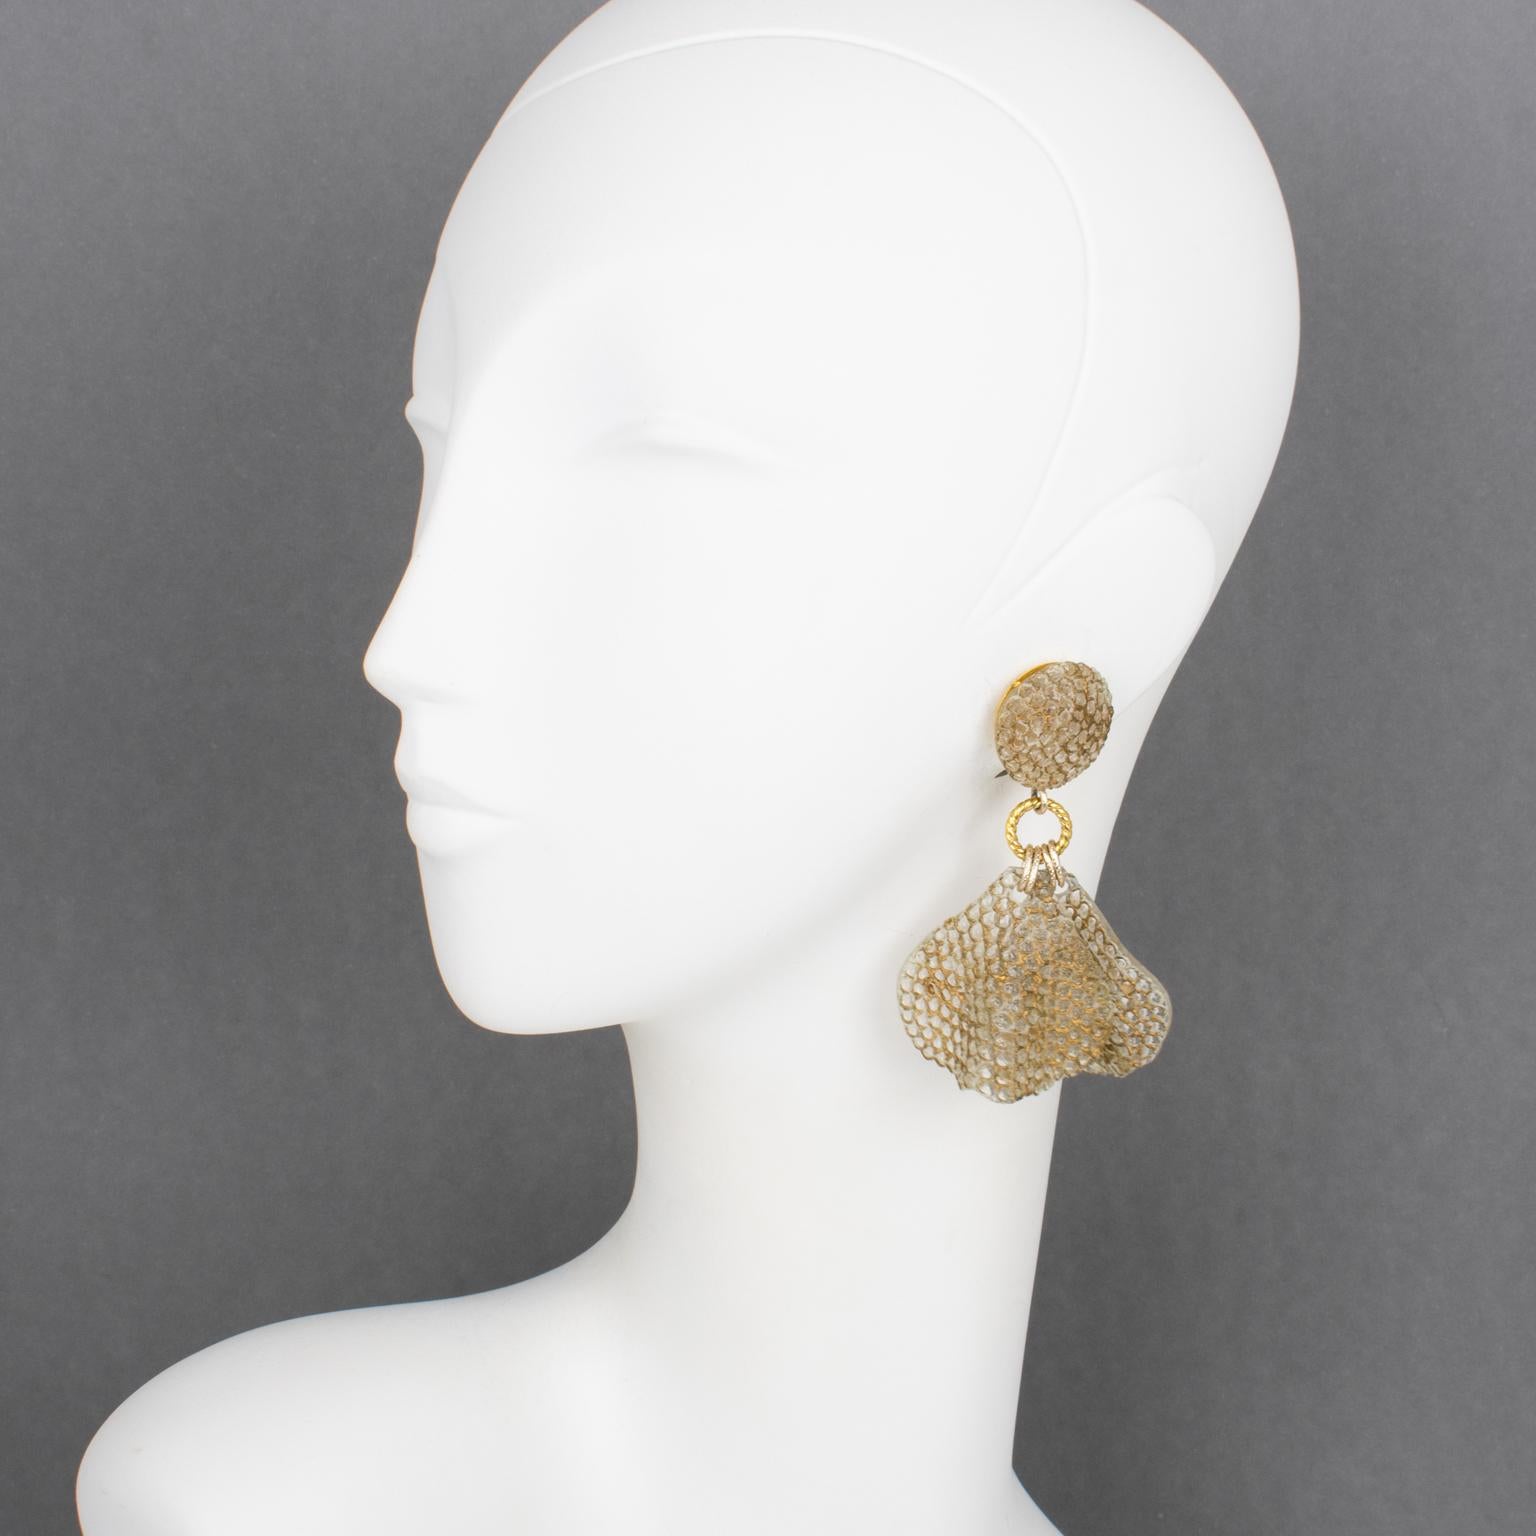 These gorgeous Francoise Montague Paris clip-on earrings, designed by Cilea Paris, feature an oversized dangle shape in translucent resin with dimensional waved and honeycomb textured petals embellished with gold application. The earrings are built